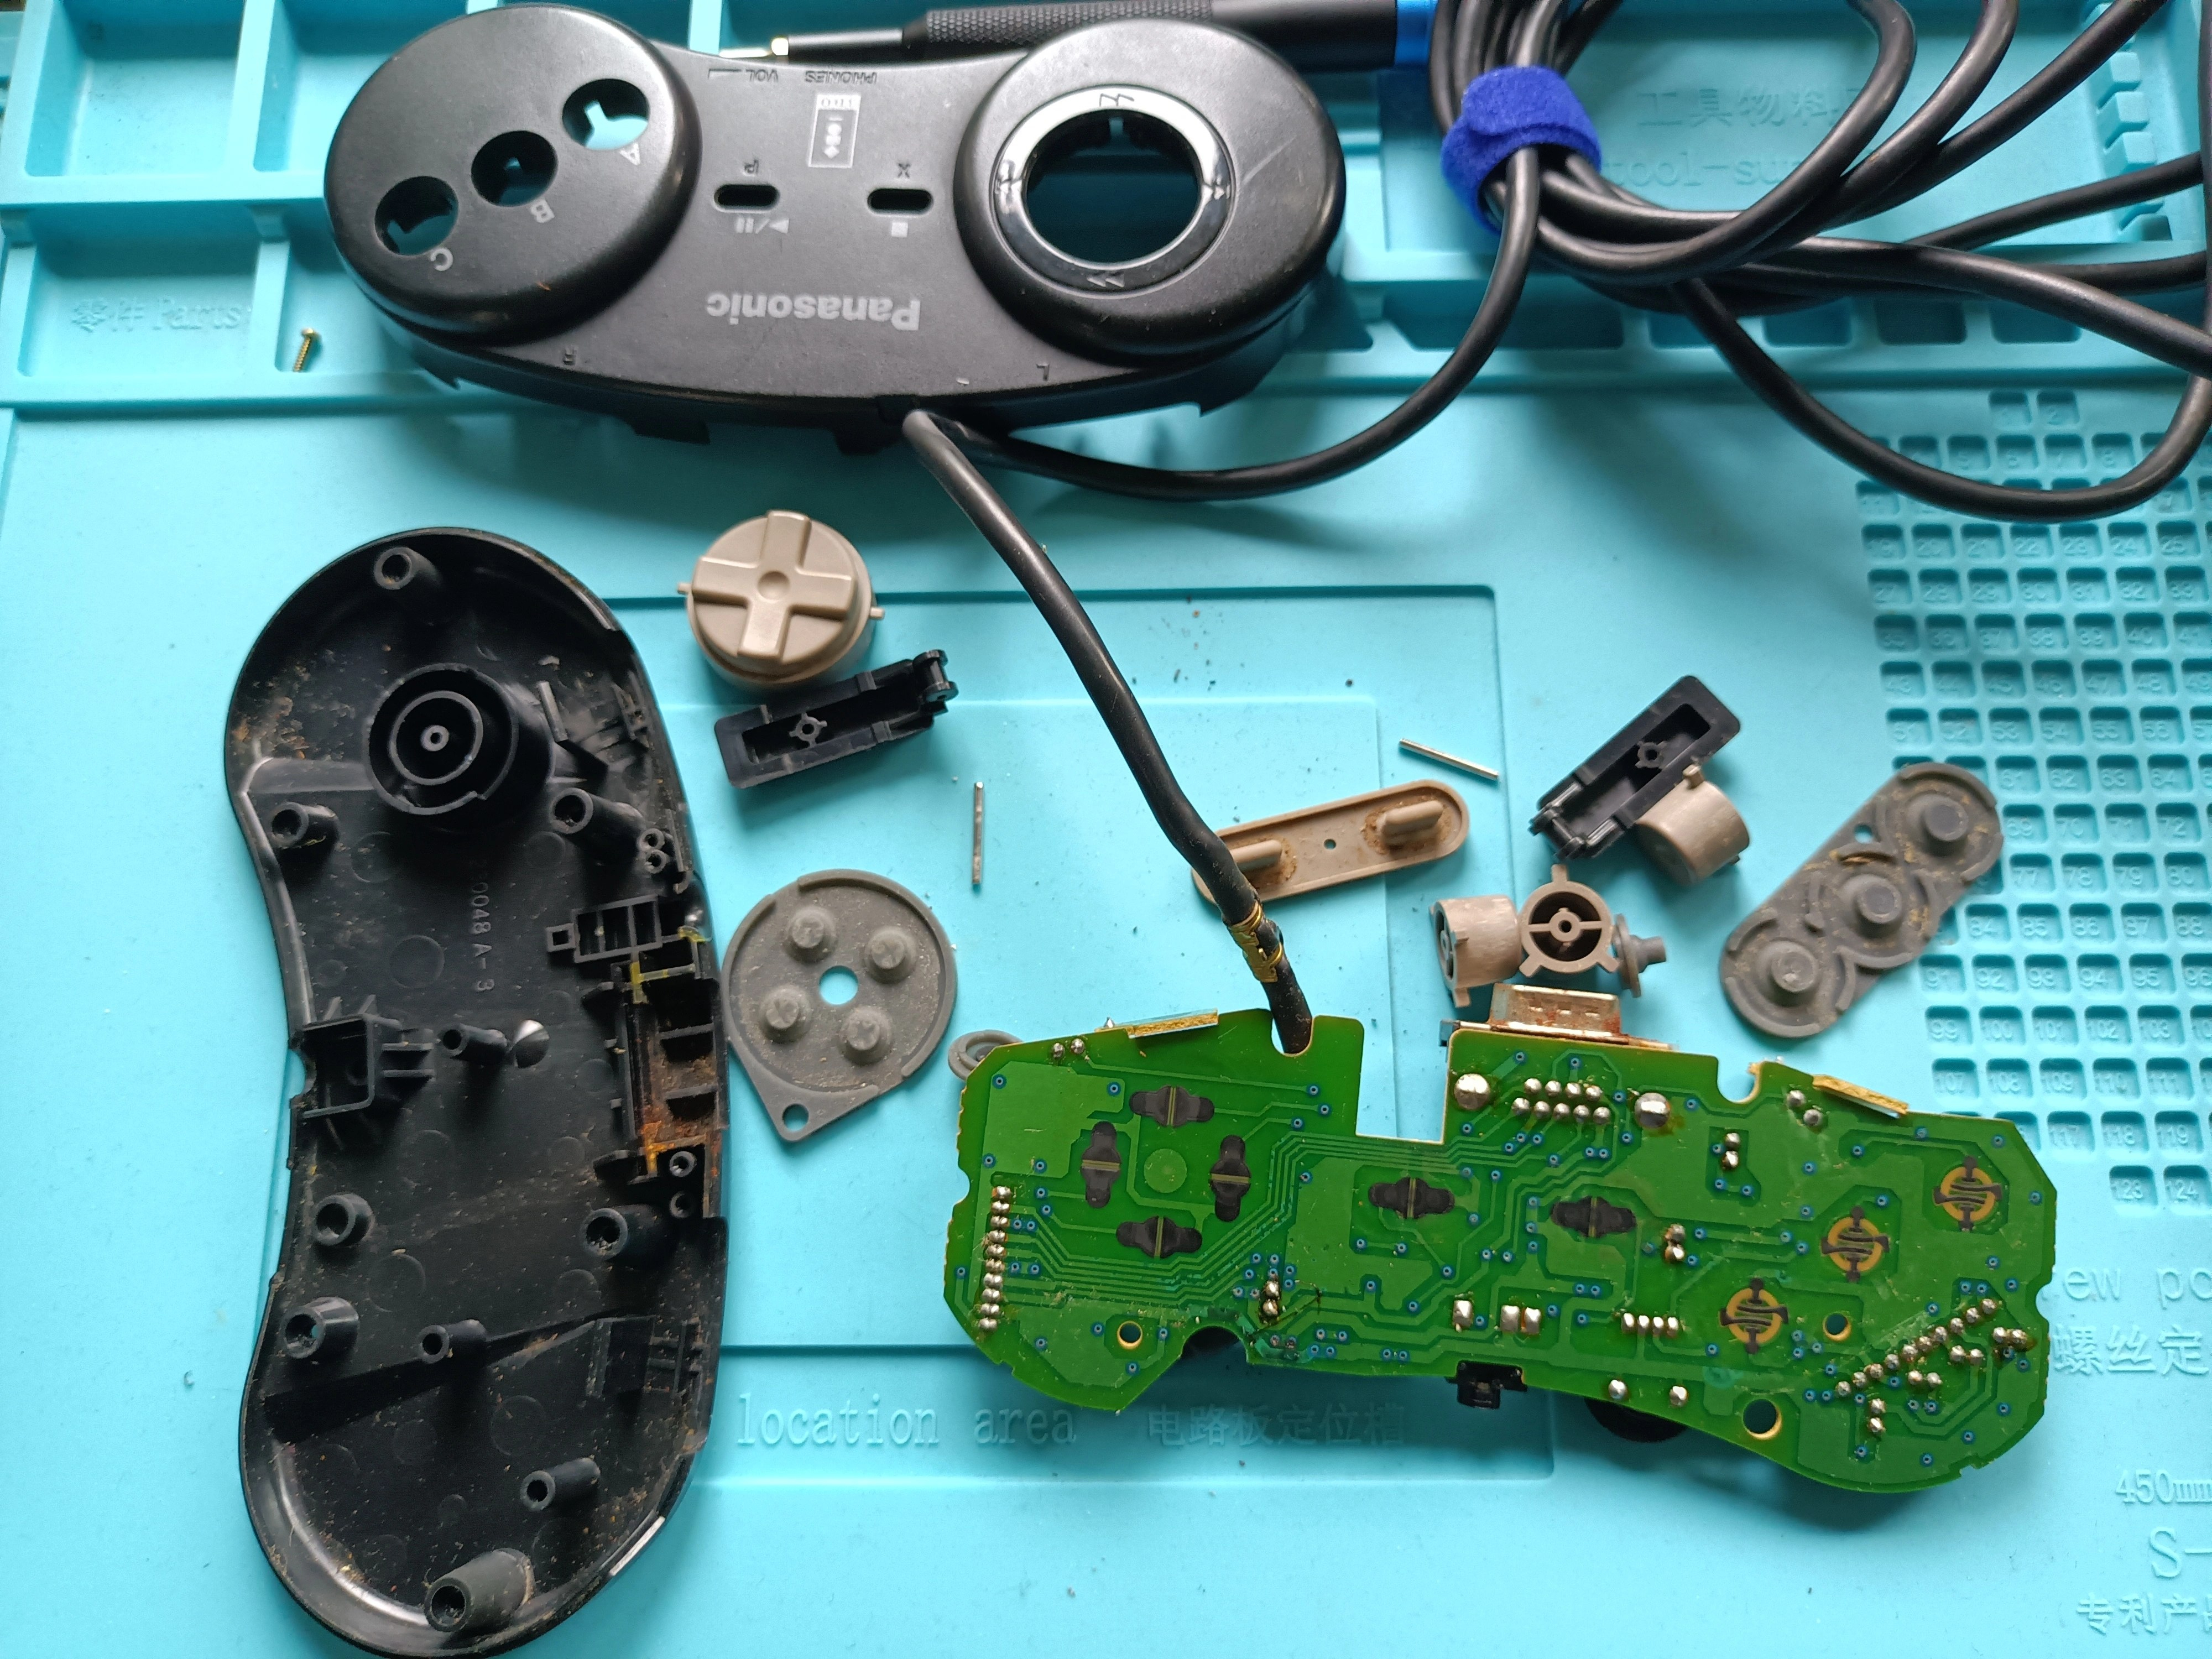 Panasonic 3DO controller stripped down for repair